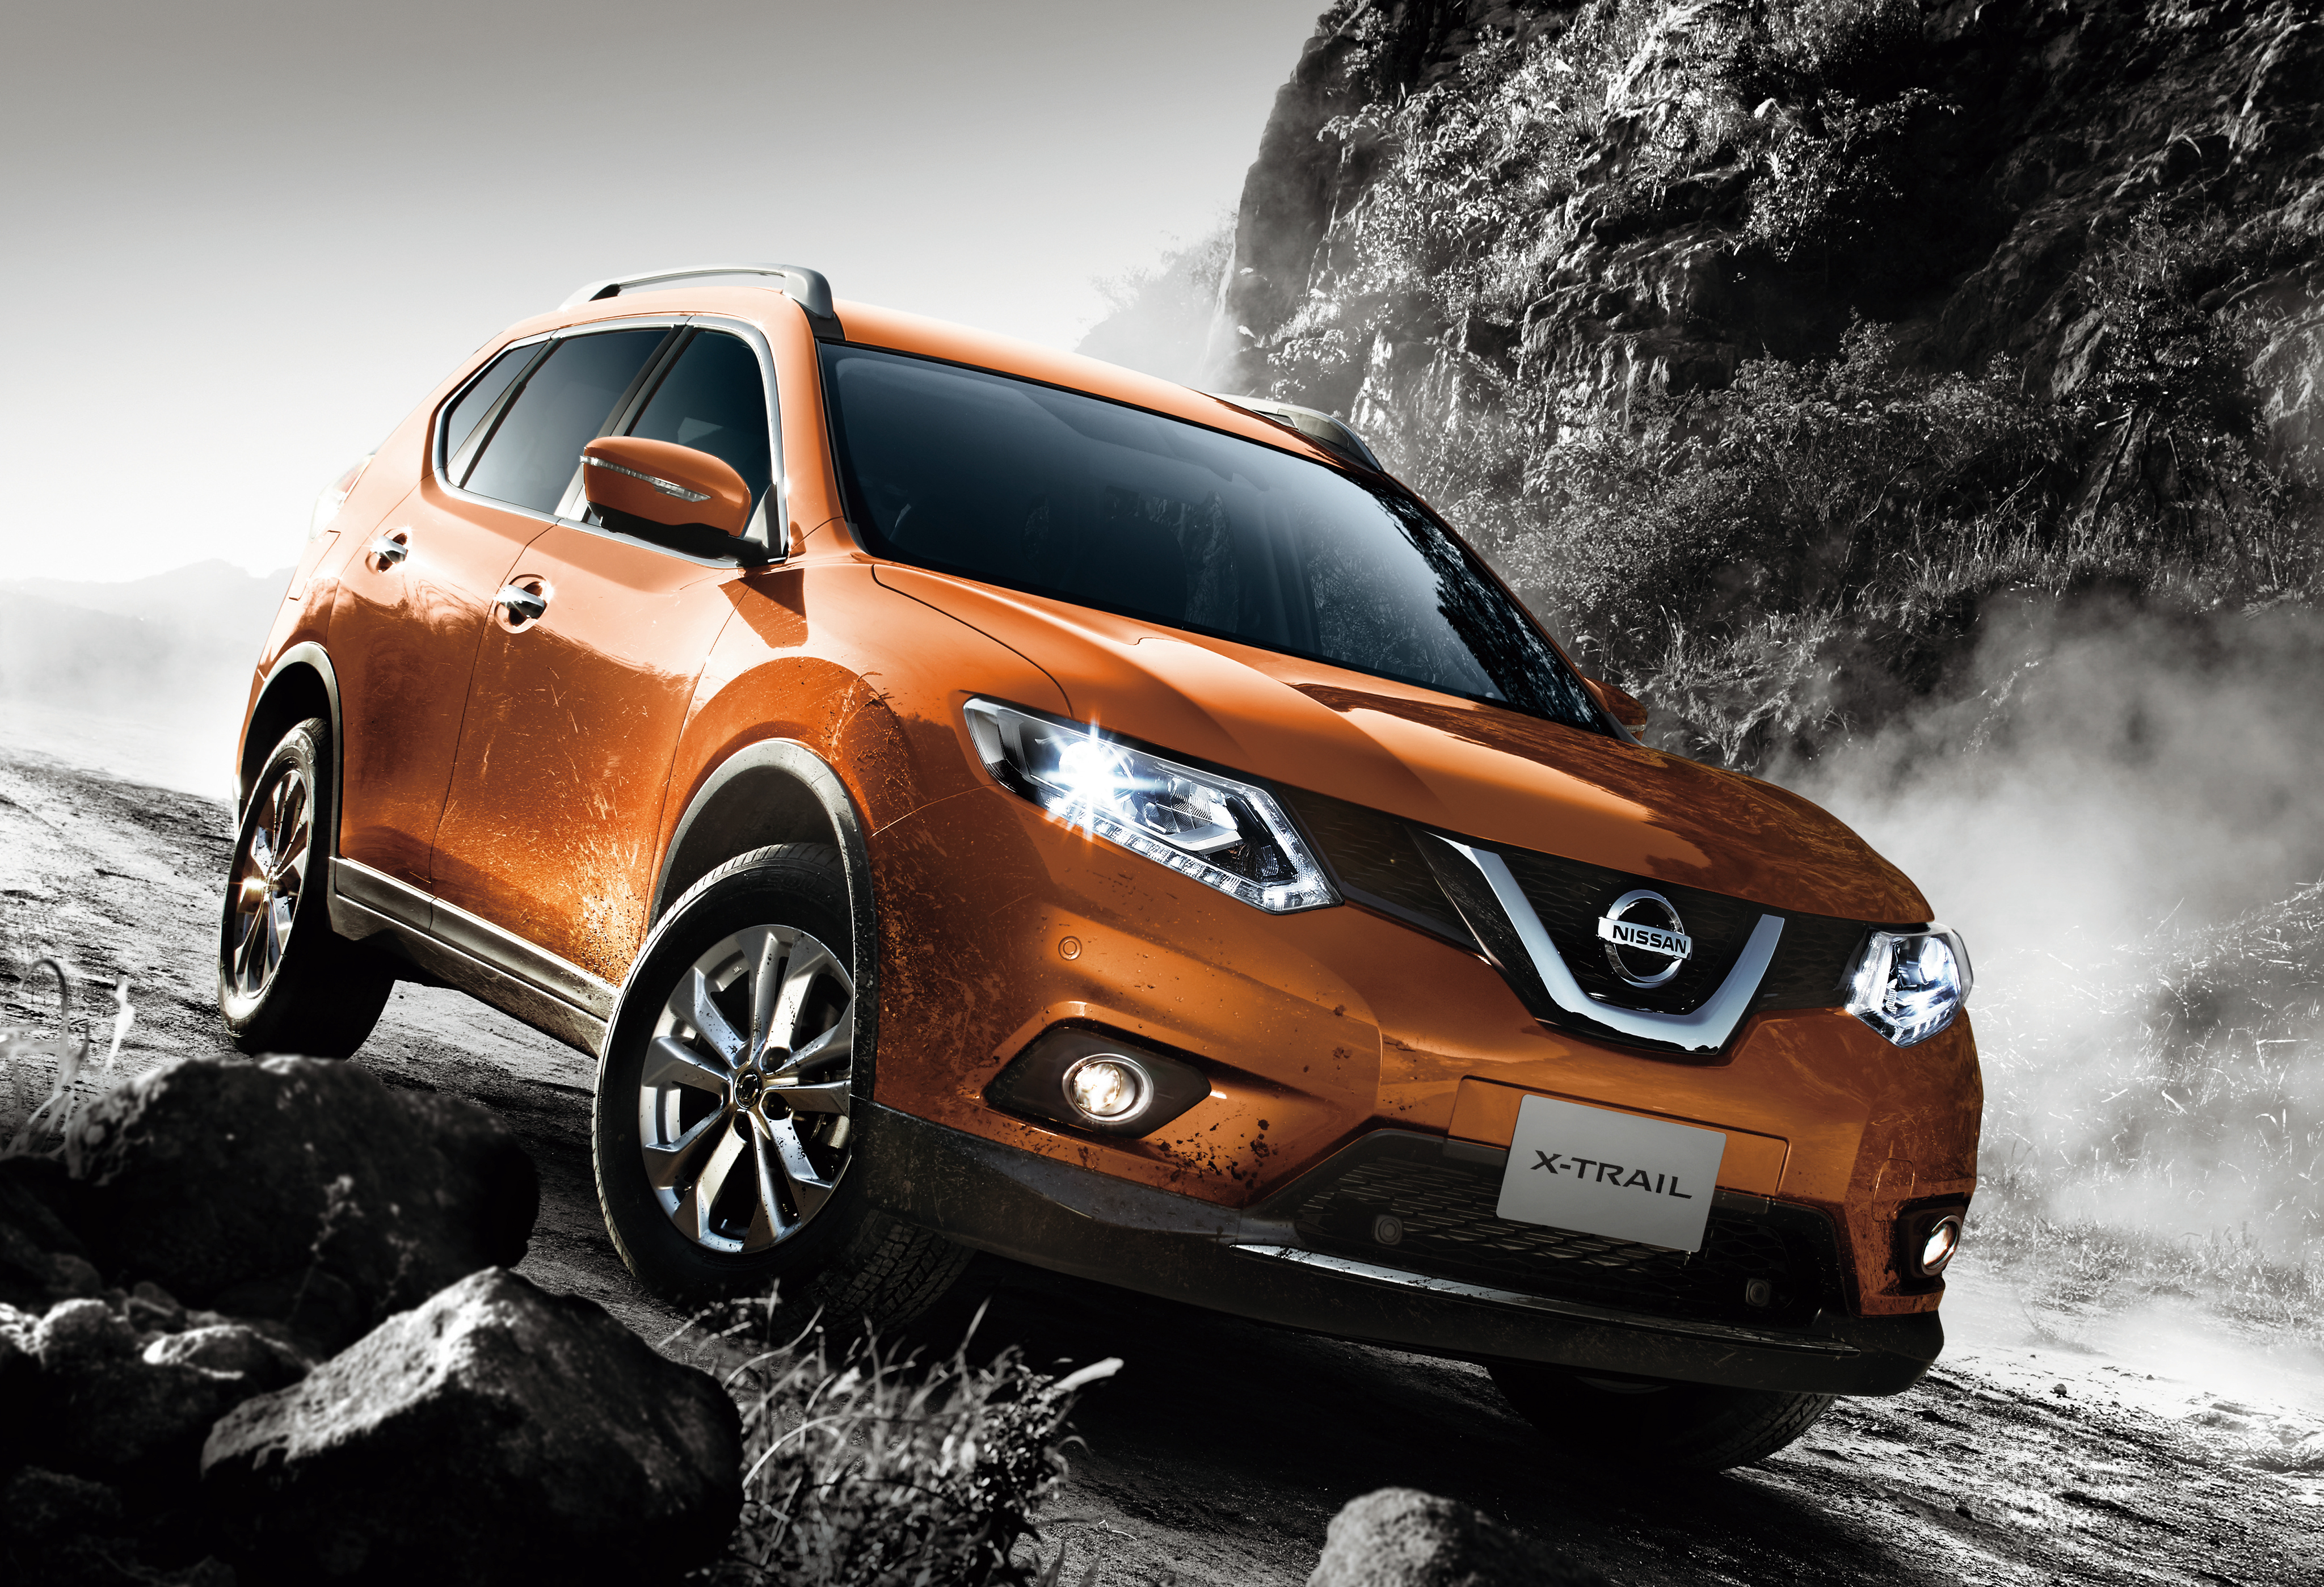 Vehicles Nissan X-Trail HD Wallpaper | Background Image